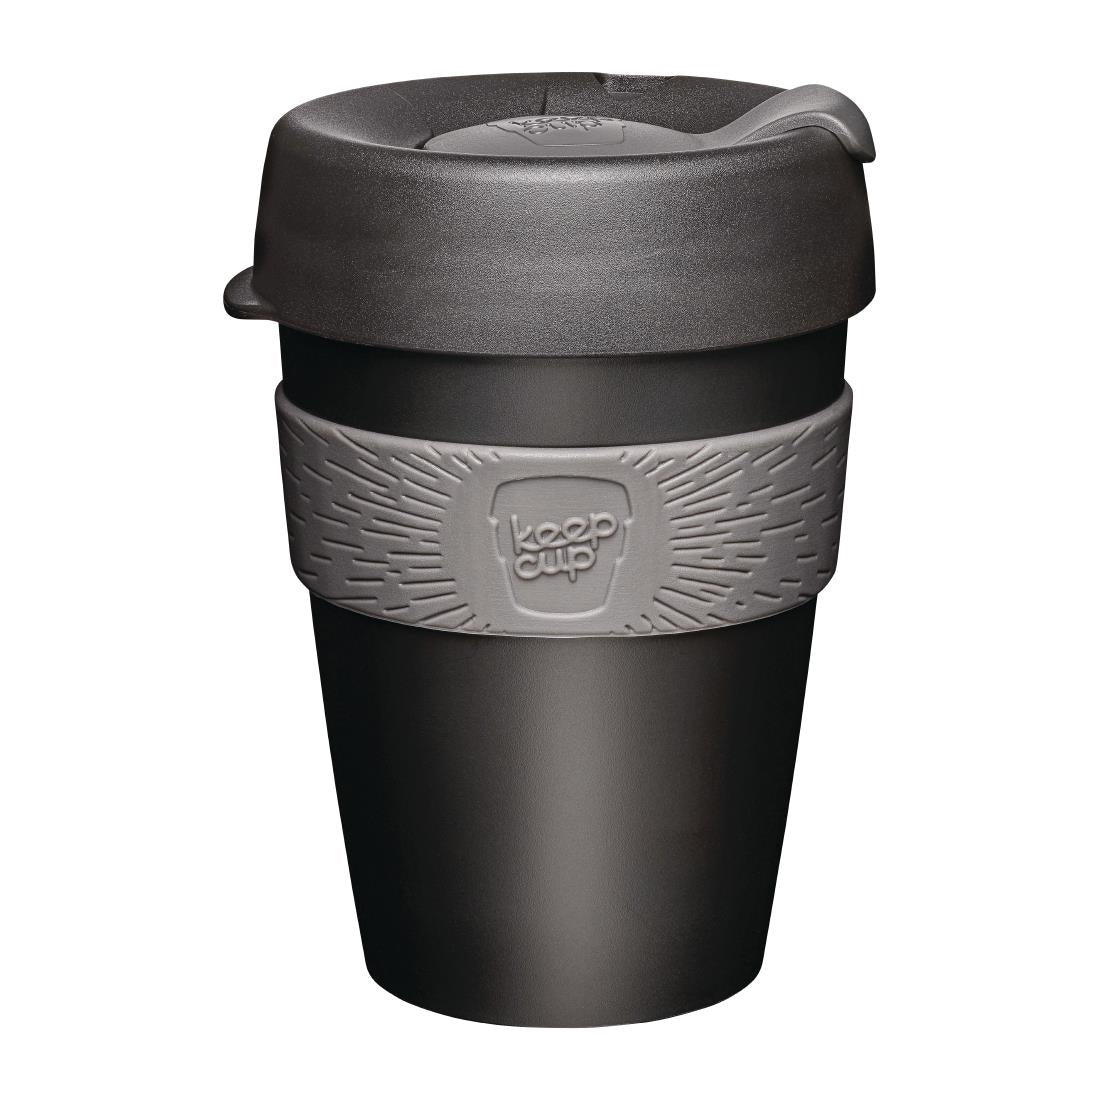 DY482 KeepCup Original Reusable Coffee Cup Doppio 12oz JD Catering Equipment Solutions Ltd